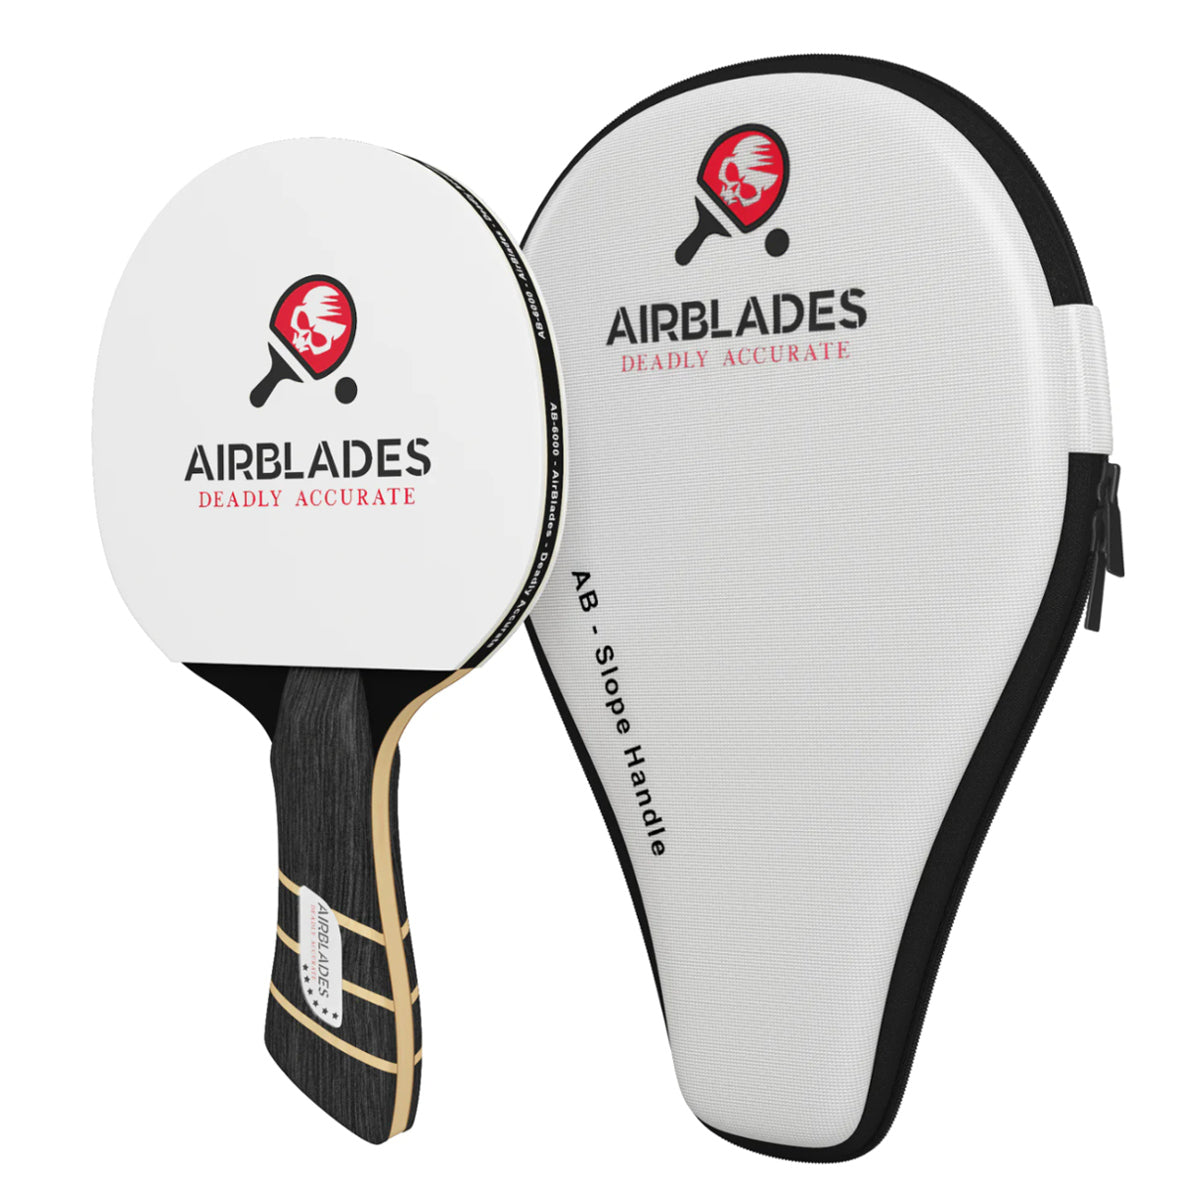 Airblades Professional Ping Pong Paddle with Hard Carry Case (6 Star)